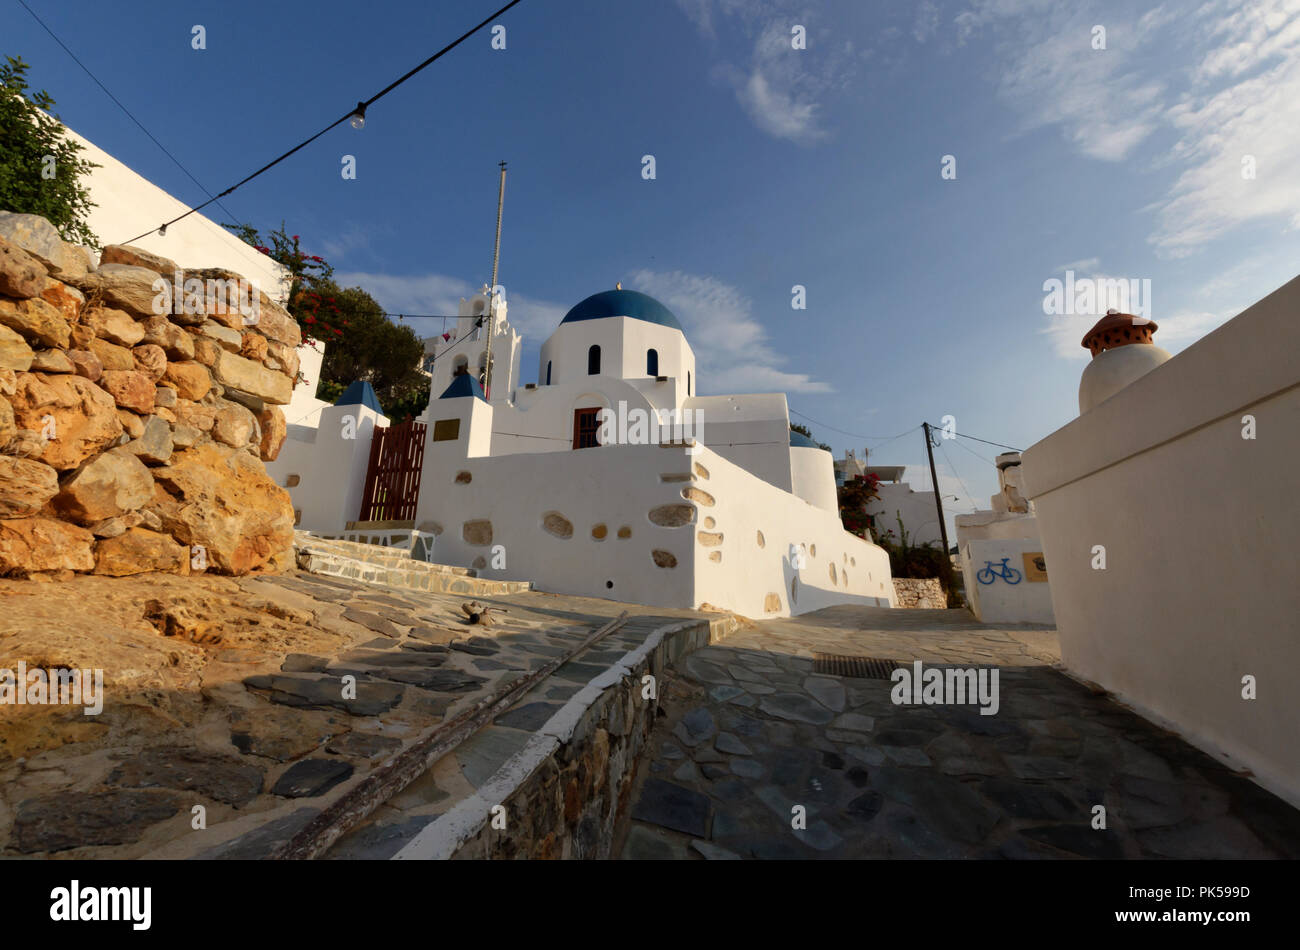 The church of the Holy Cross, located above the port of Donousa, in South Aegean Stock Photo